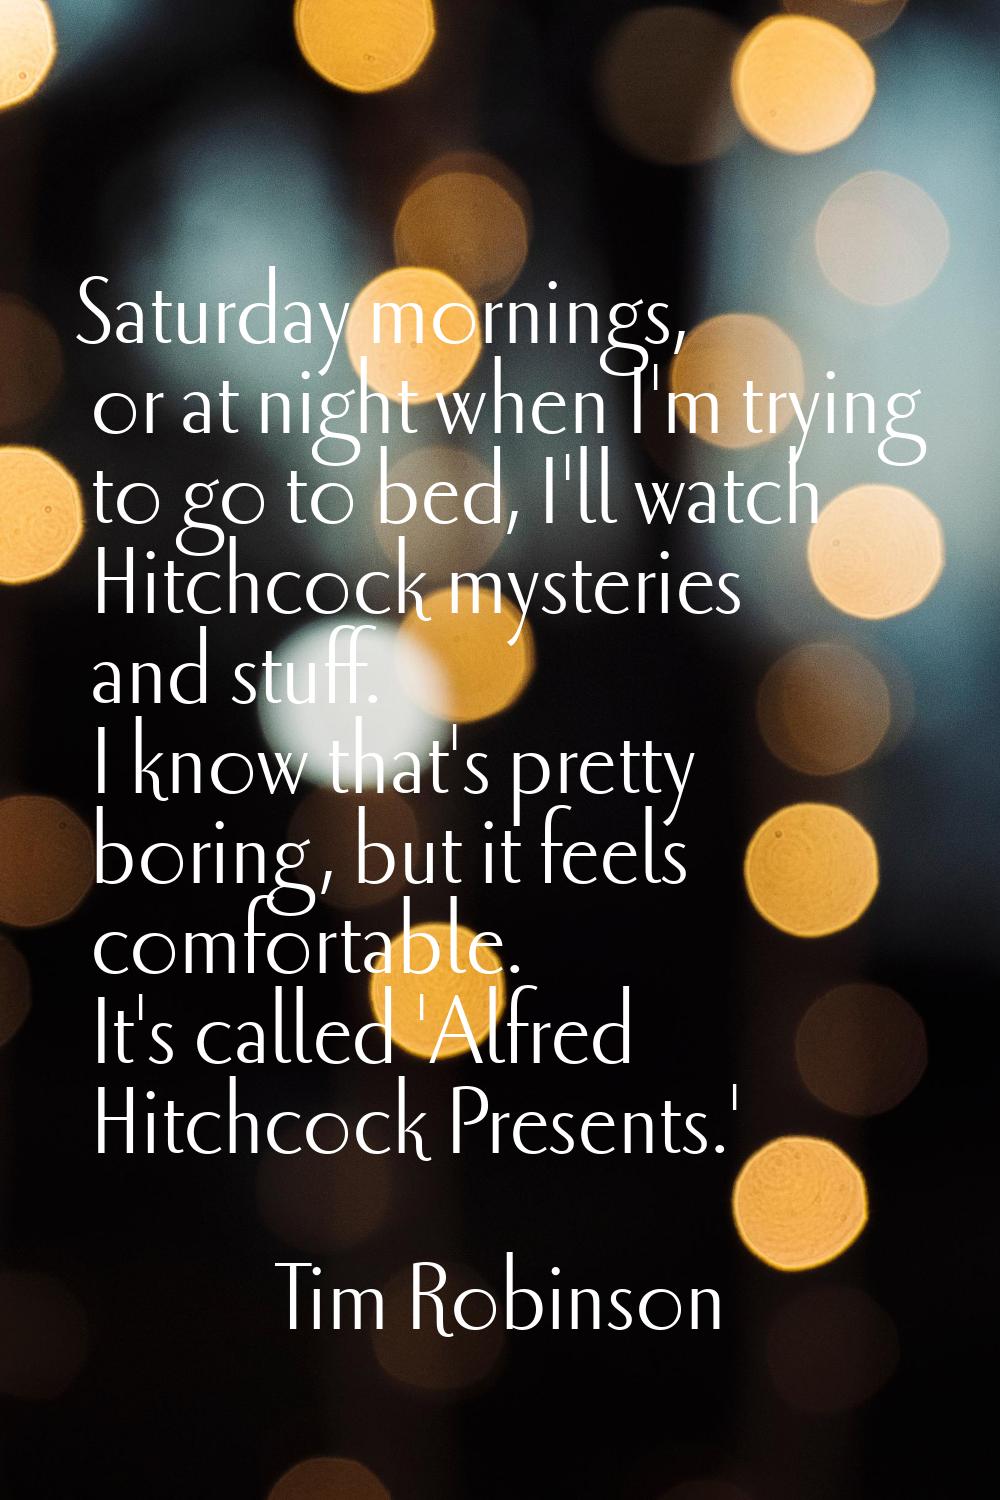 Saturday mornings, or at night when I'm trying to go to bed, I'll watch Hitchcock mysteries and stu